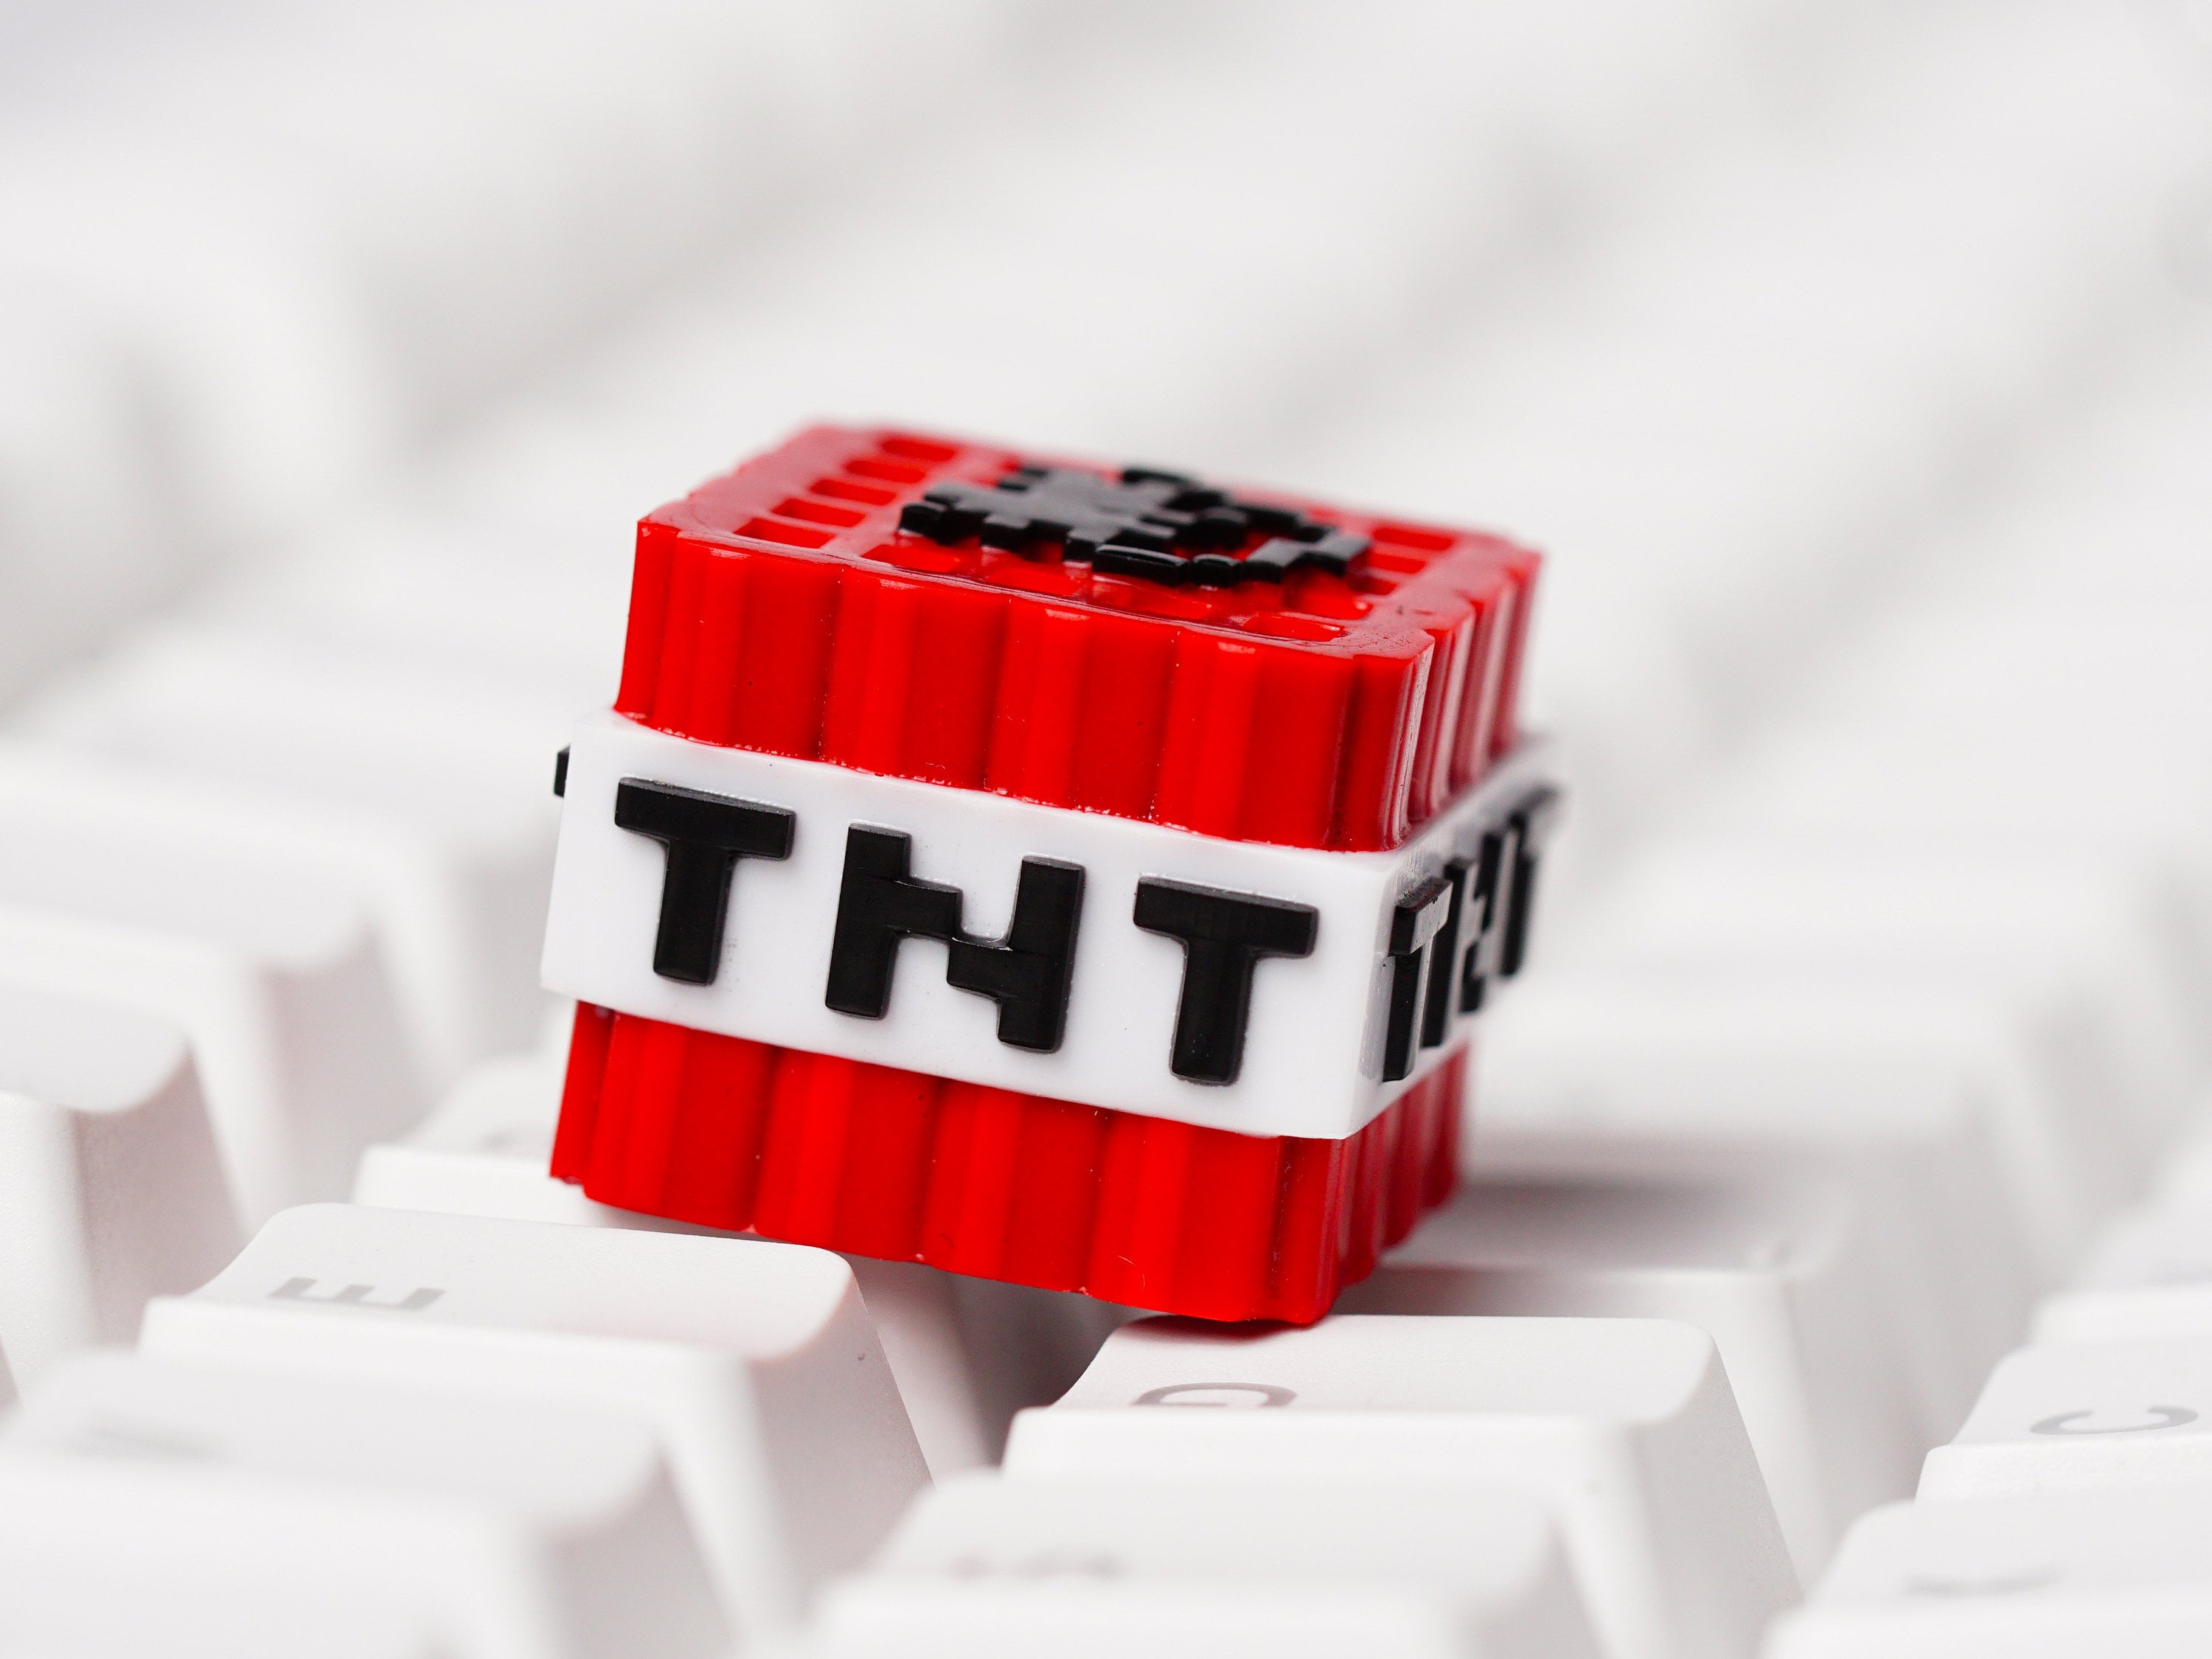 T.N.T Bom.b Keycap, Mine-Craft Keycap, Gaming Keycap, Keycap For Cherry MX Switches Mechanical Keyboard, Gift for Him